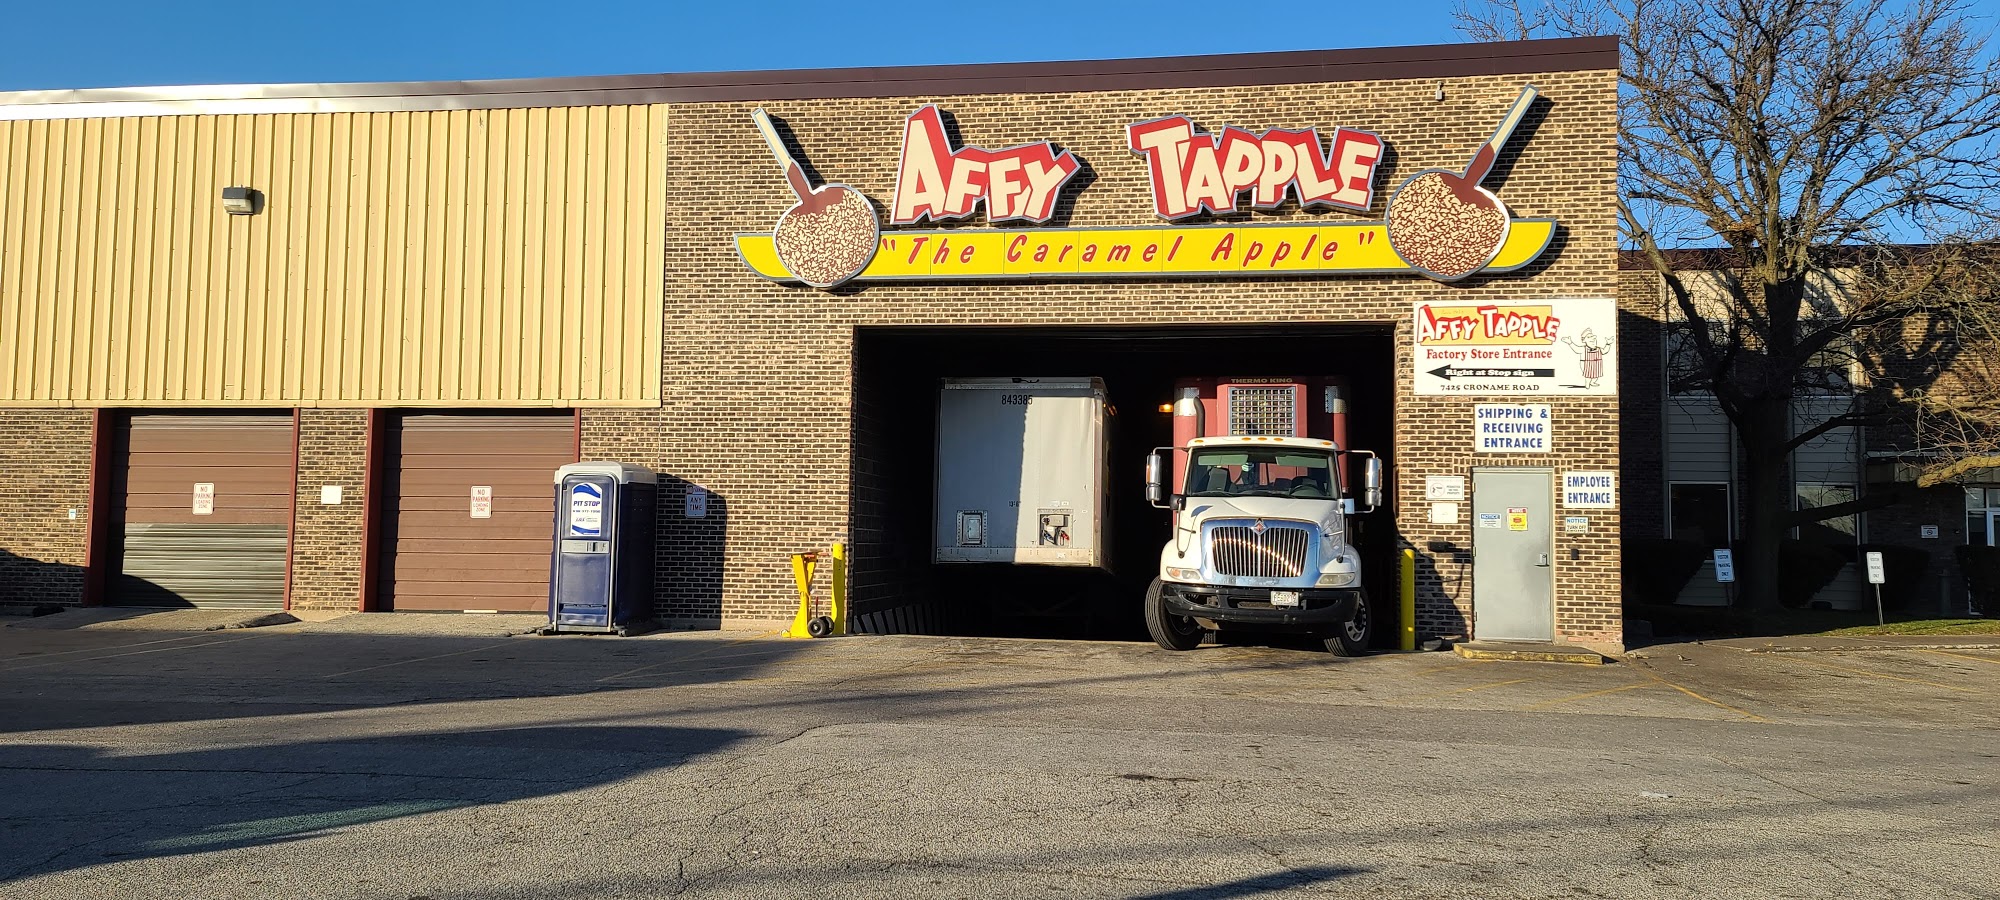 The Affy Tapple Factory Store